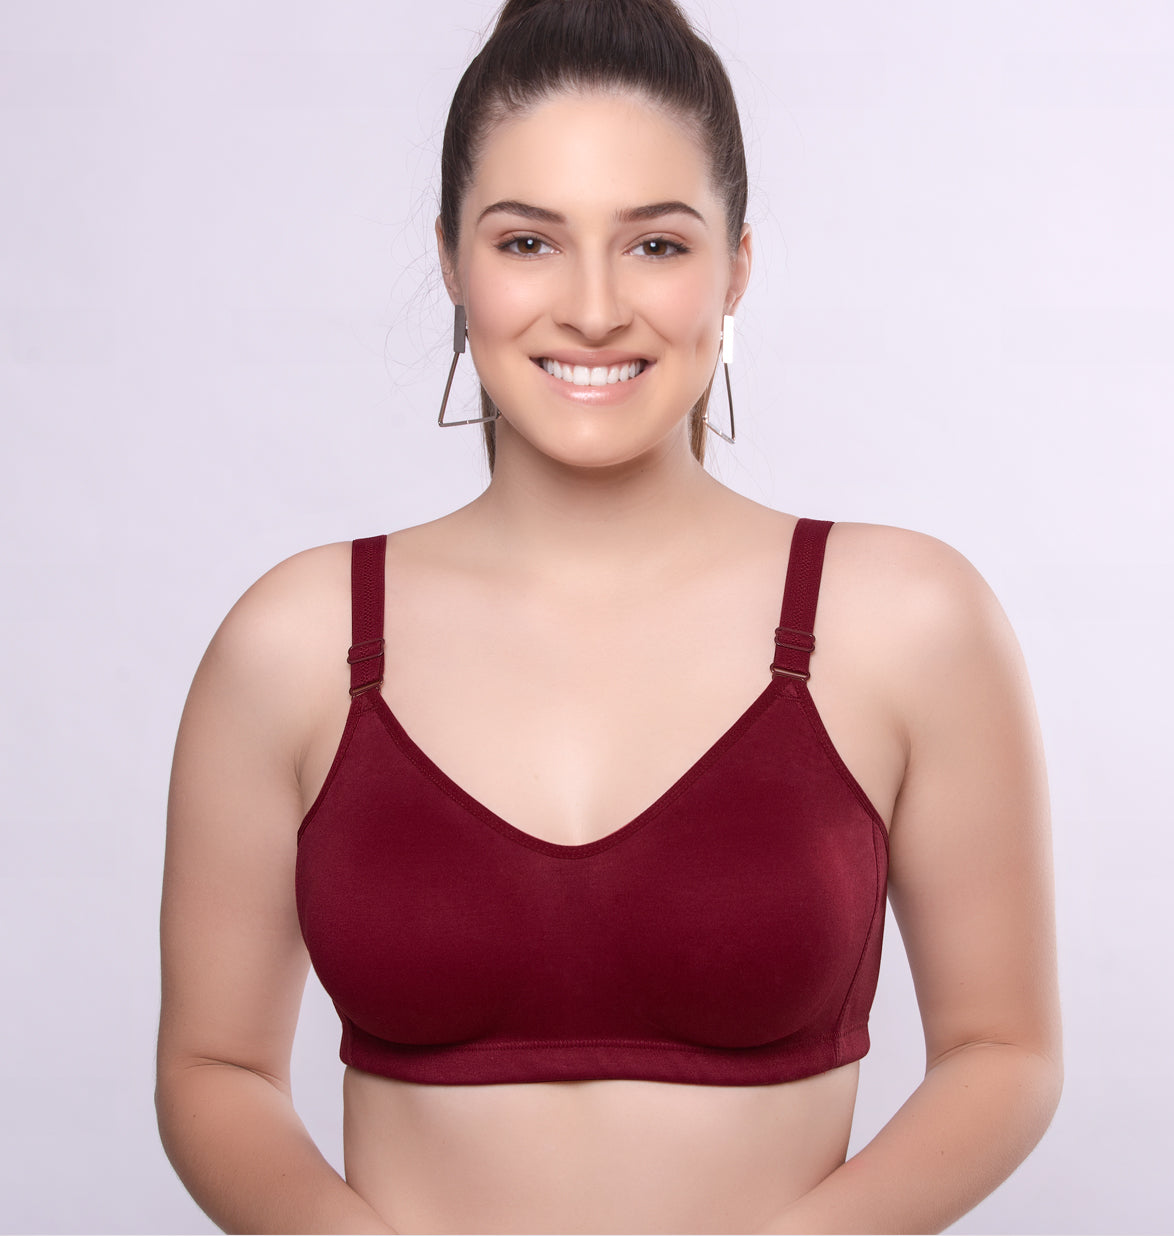 Riza superfit bra comes with satin front and skin side cotton is